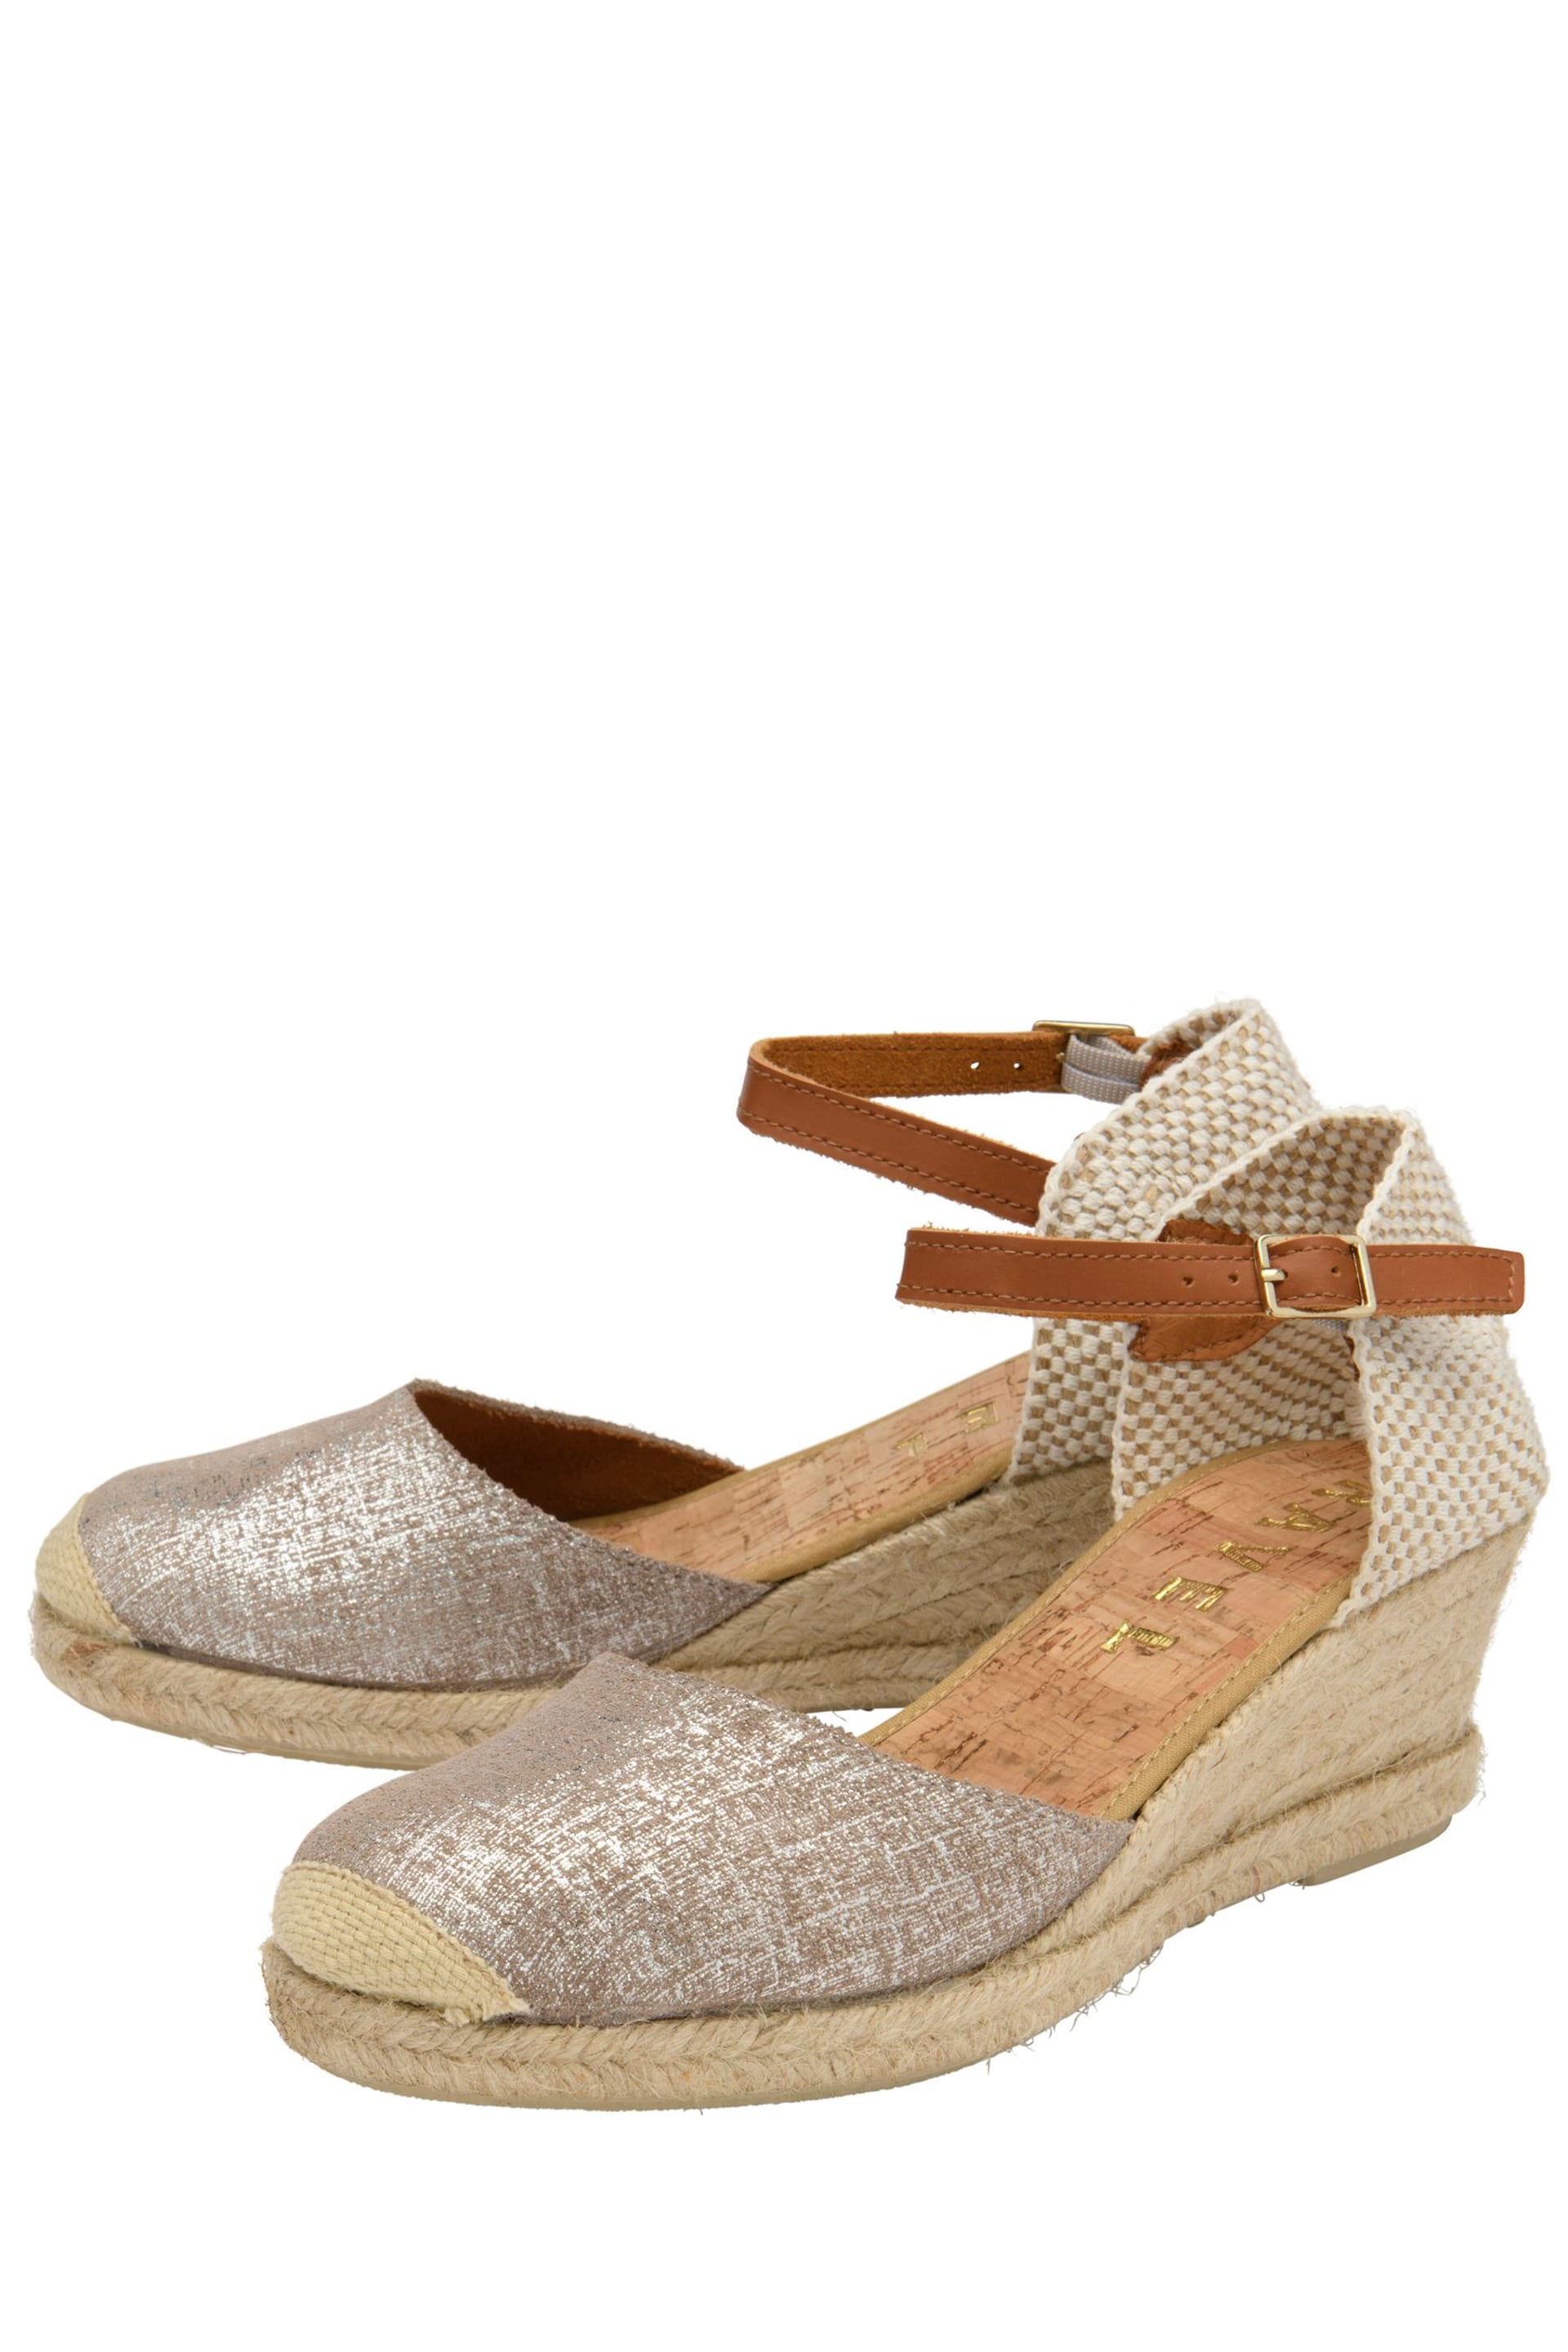 Ravel Silver Ankle Strap Wedge Espadrilles - Image 2 of 4